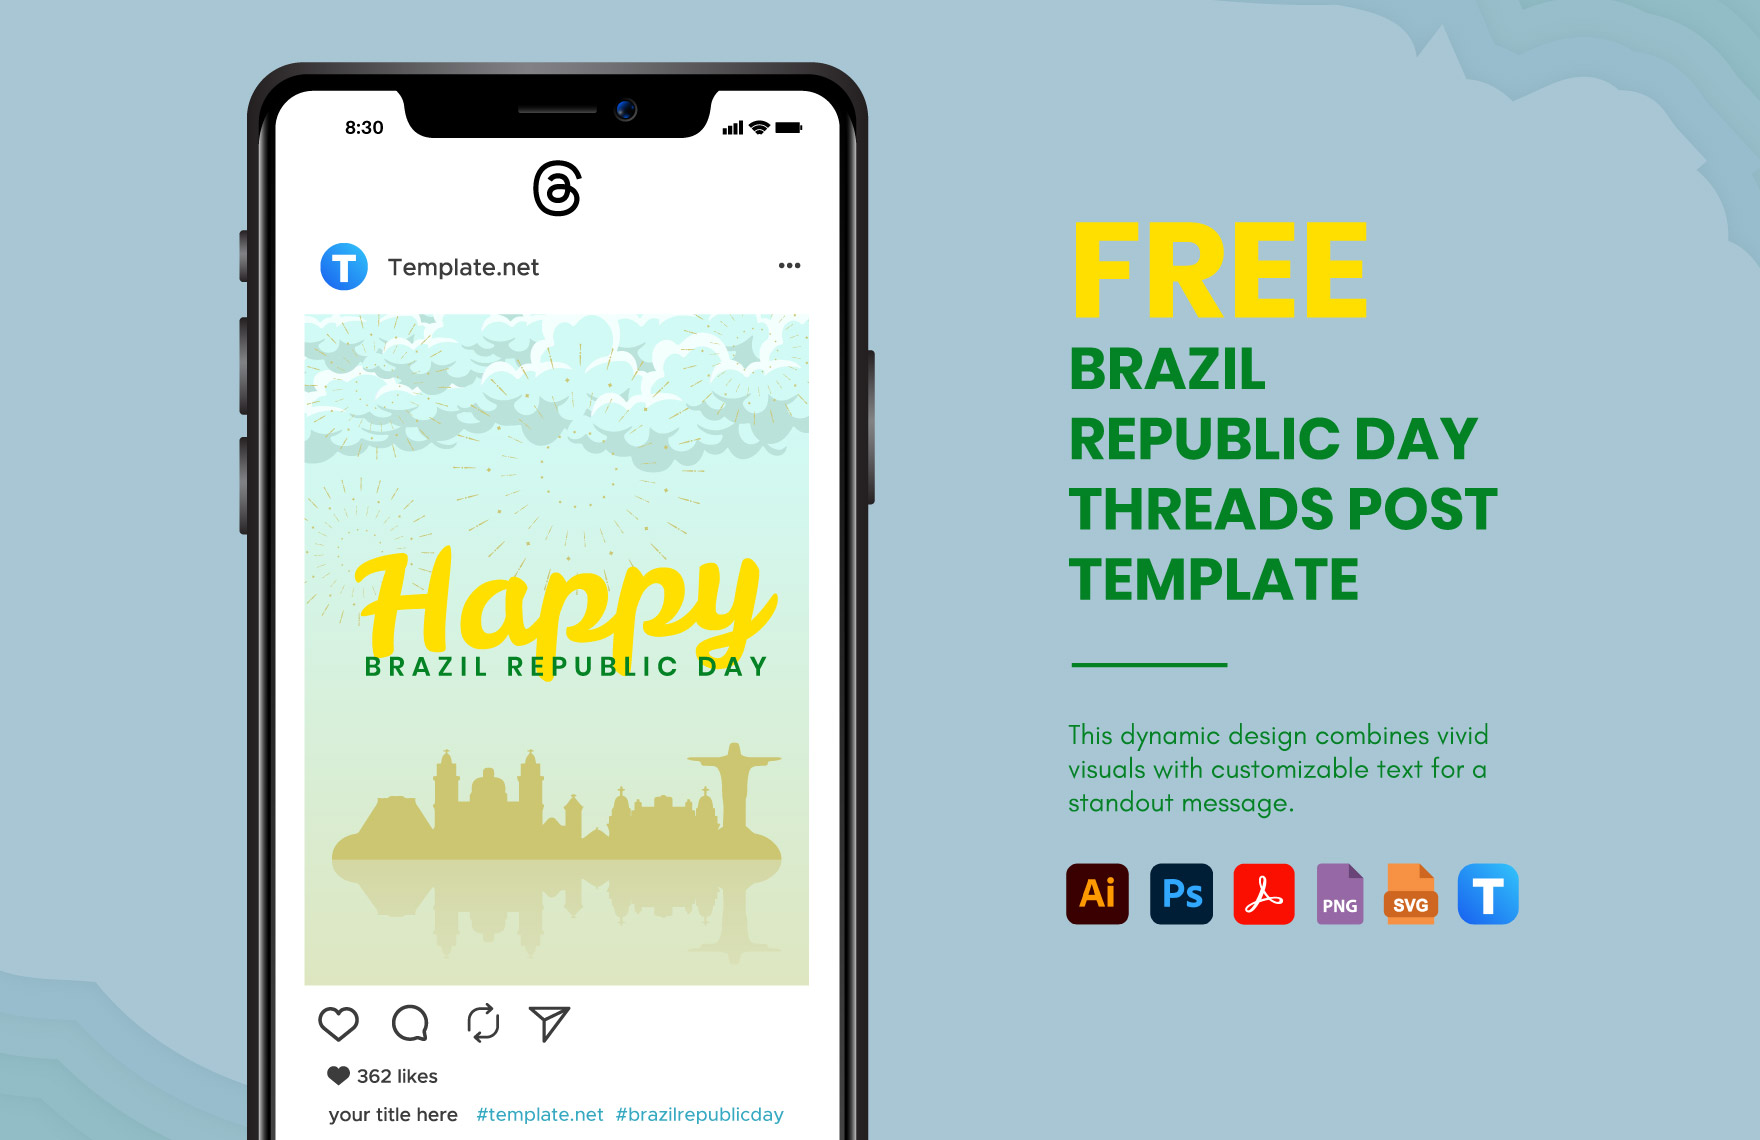 Free Brazil Republic Day Threads Post Template in PDF, Illustrator, PSD, SVG, PNG